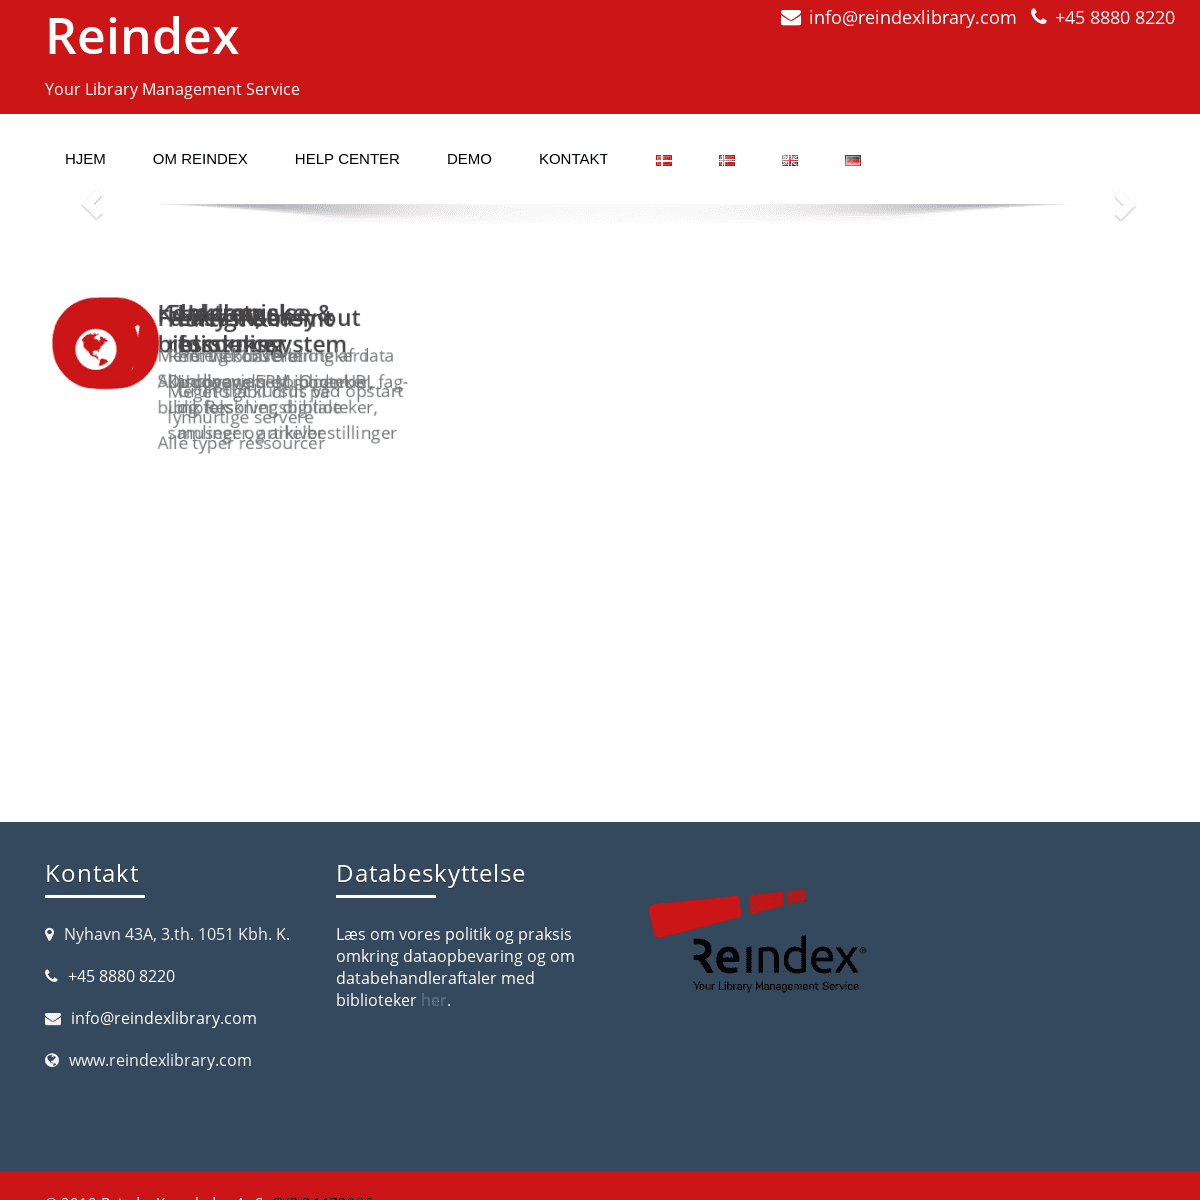 Reindex – Your Library Management Service